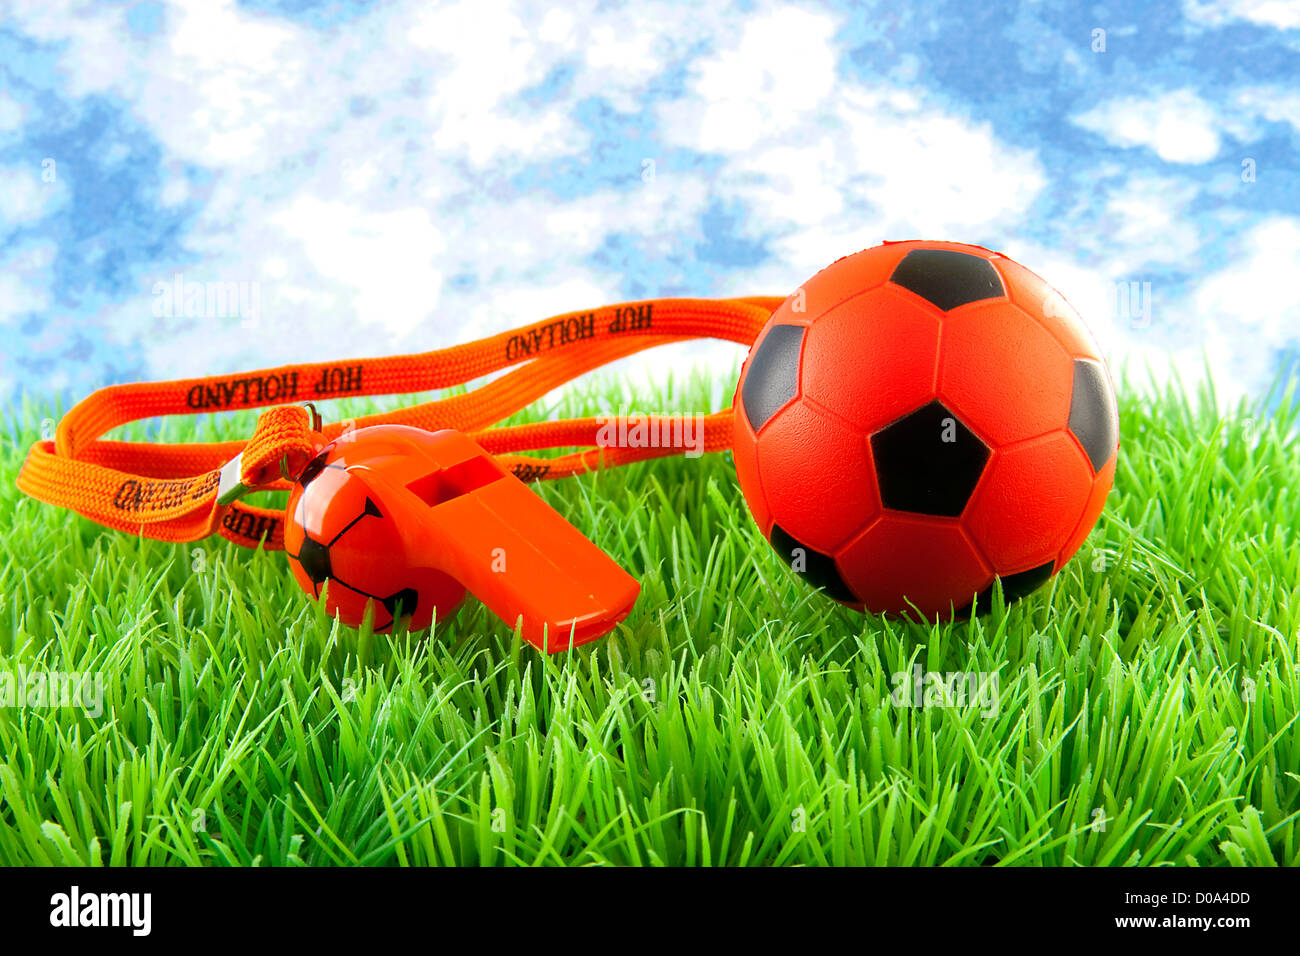 orange Soccer ball and flute on grass against blue cloudy sky Stock Photo